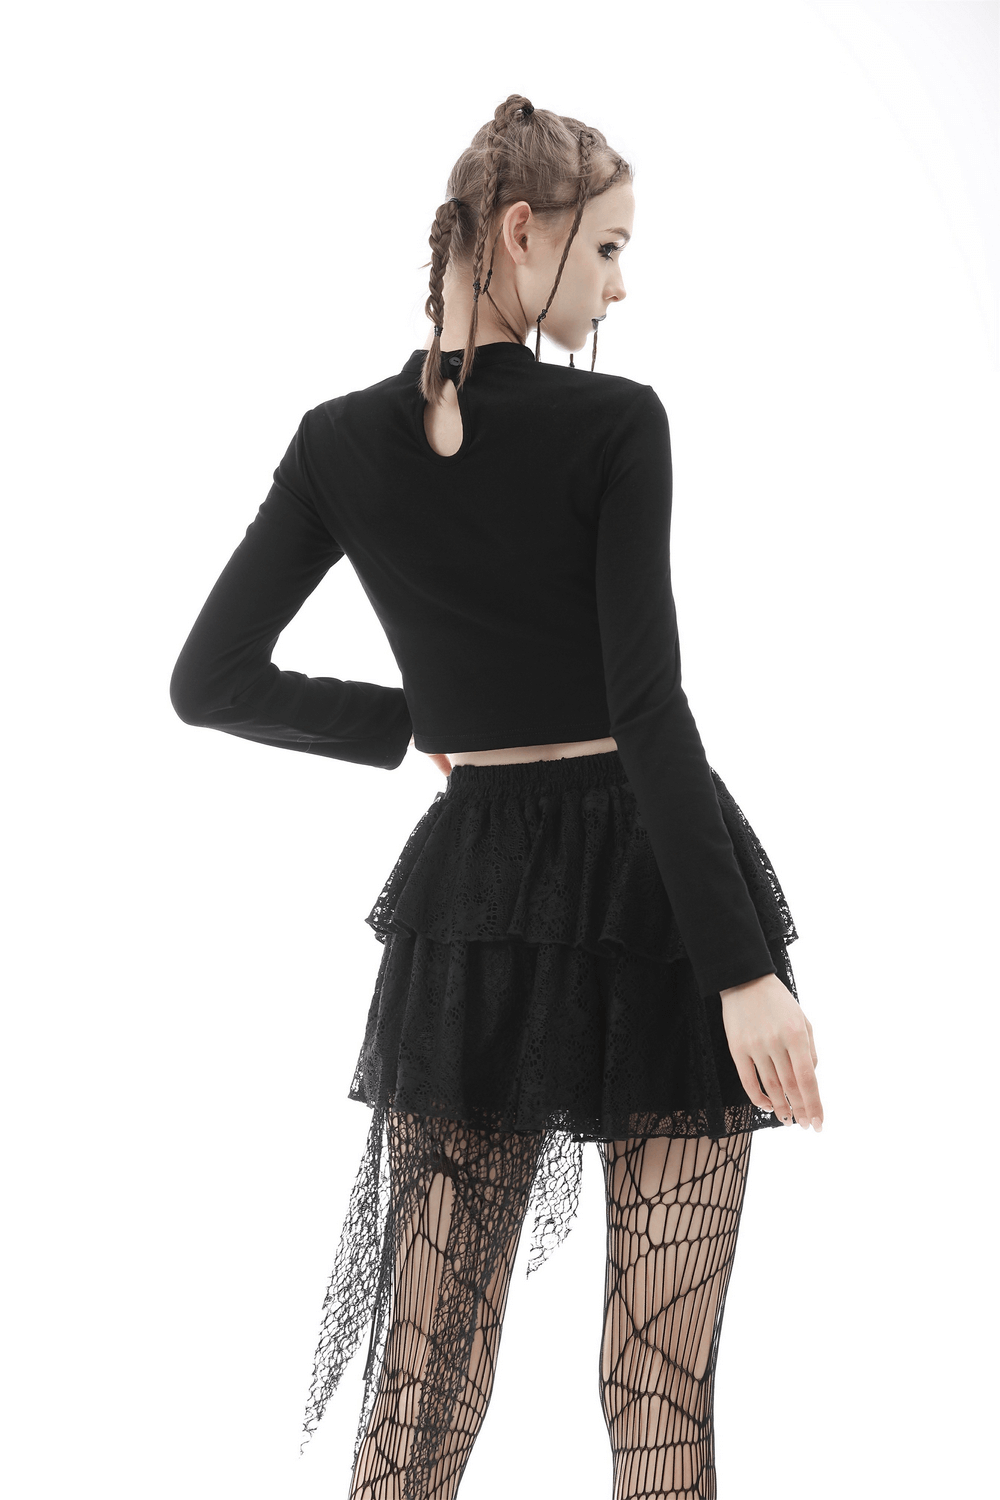 Edgy Women's Black Lace-Up Crop Top with Long Sleeves